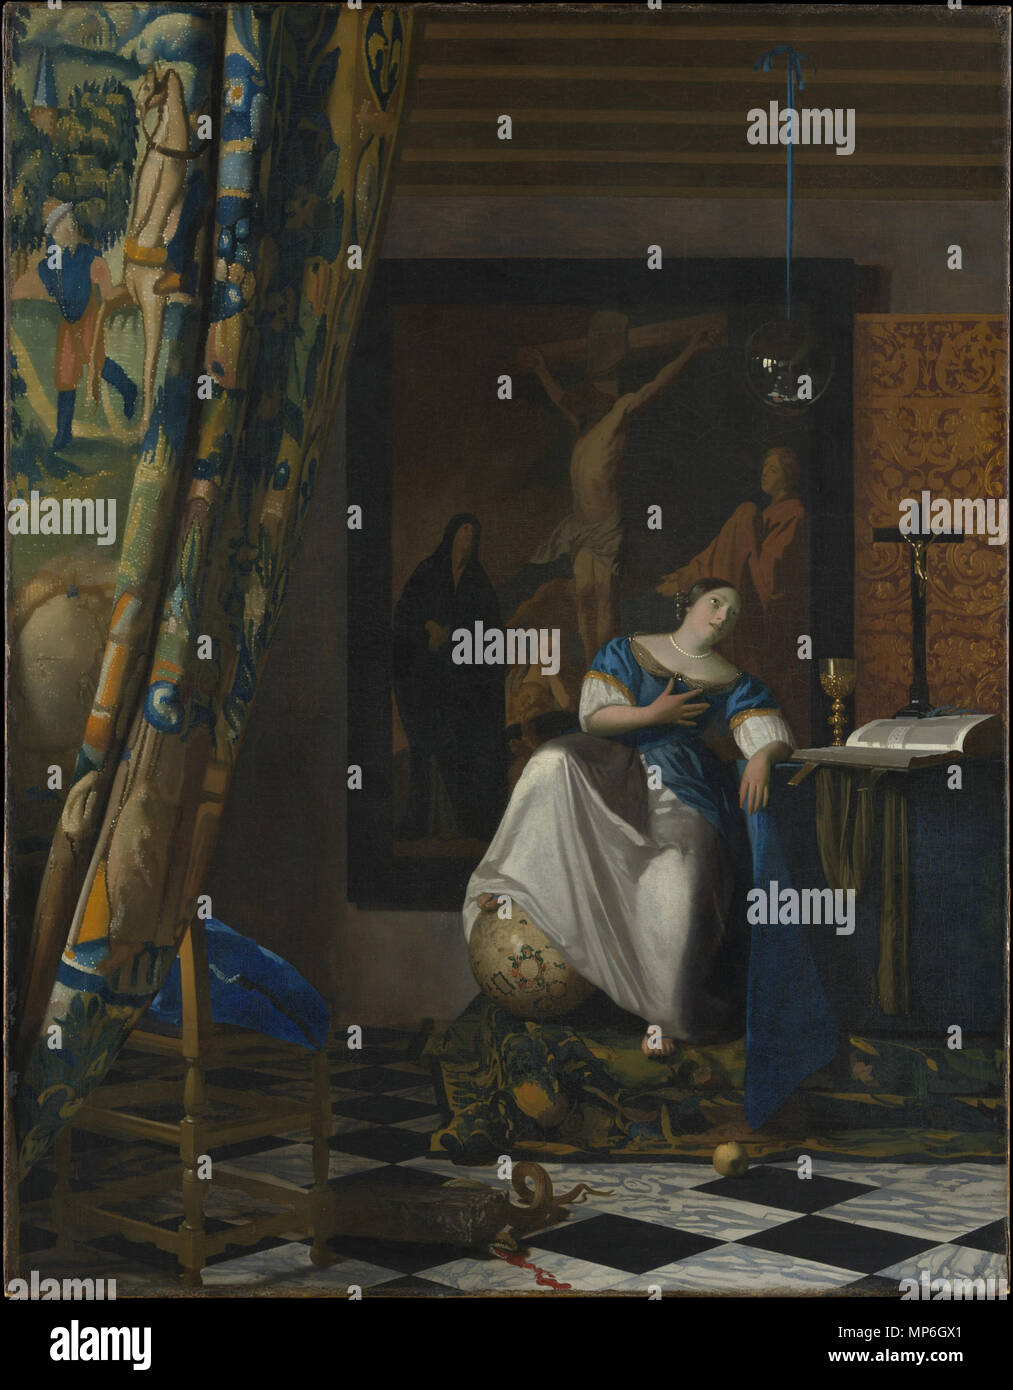 . English: Johannes Vermeer, Allegory of the Catholic Faith, The Metropolitan Museum of Art. Oil on canvas. 45 x 35 in. (114.3 x 88.9 cm). circa 1670–72.   Johannes Vermeer  (1632–1675)      Alternative names Johannes van der Meer, Jan Vermeer, Jan Vermeer van Delft, Johannes Reyniersz. Vermeer  Description Dutch painter and art dealer  Date of birth/death 31 October 1632 (baptised) 15 December 1675 (buried)  Location of birth/death Delft Delft  Work period 1653–1675  Work location Delft (1653 - 1675)  Authority control  : Q41264 VIAF: 51961439 ISNI: 0000 0001 0901 268X ULAN: 500032927 LCCN: n Stock Photo